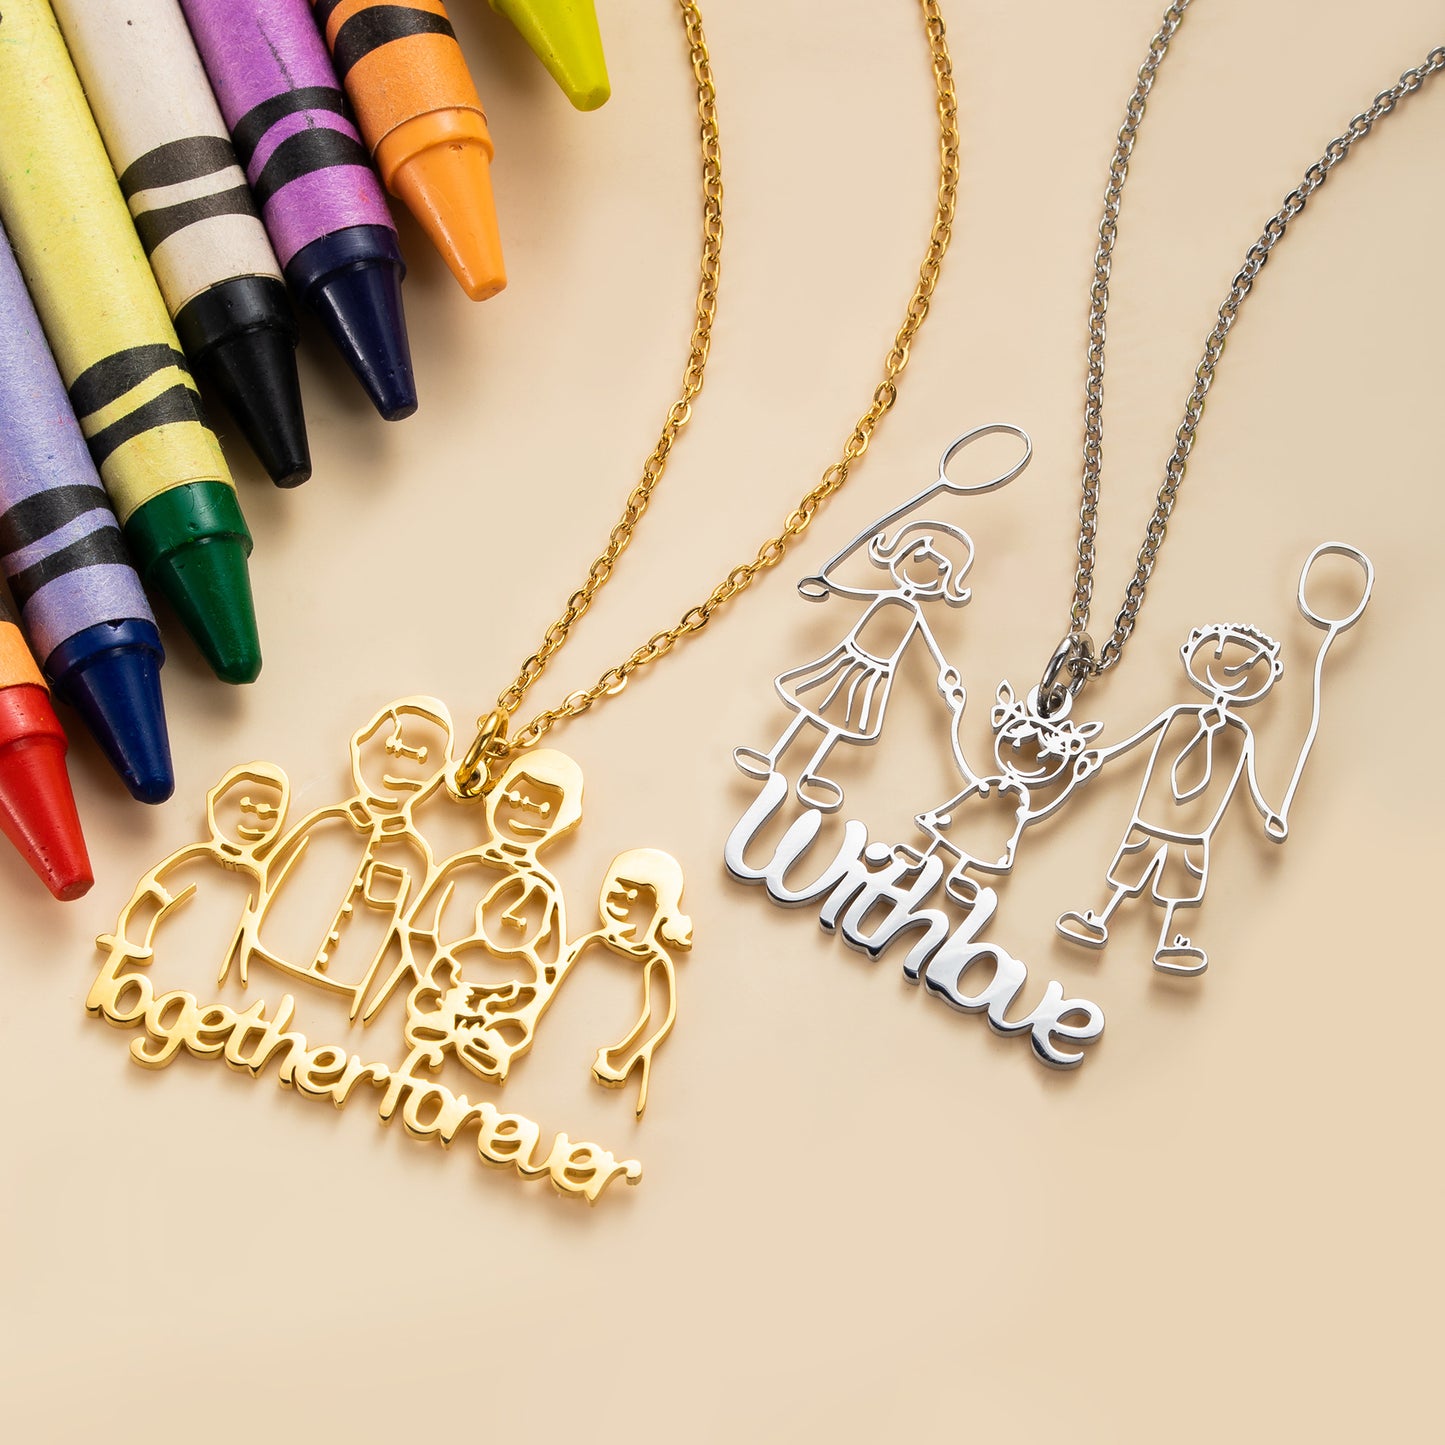 Personalized Children's Drawing Graffiti Necklace Gift for Mom Grandma